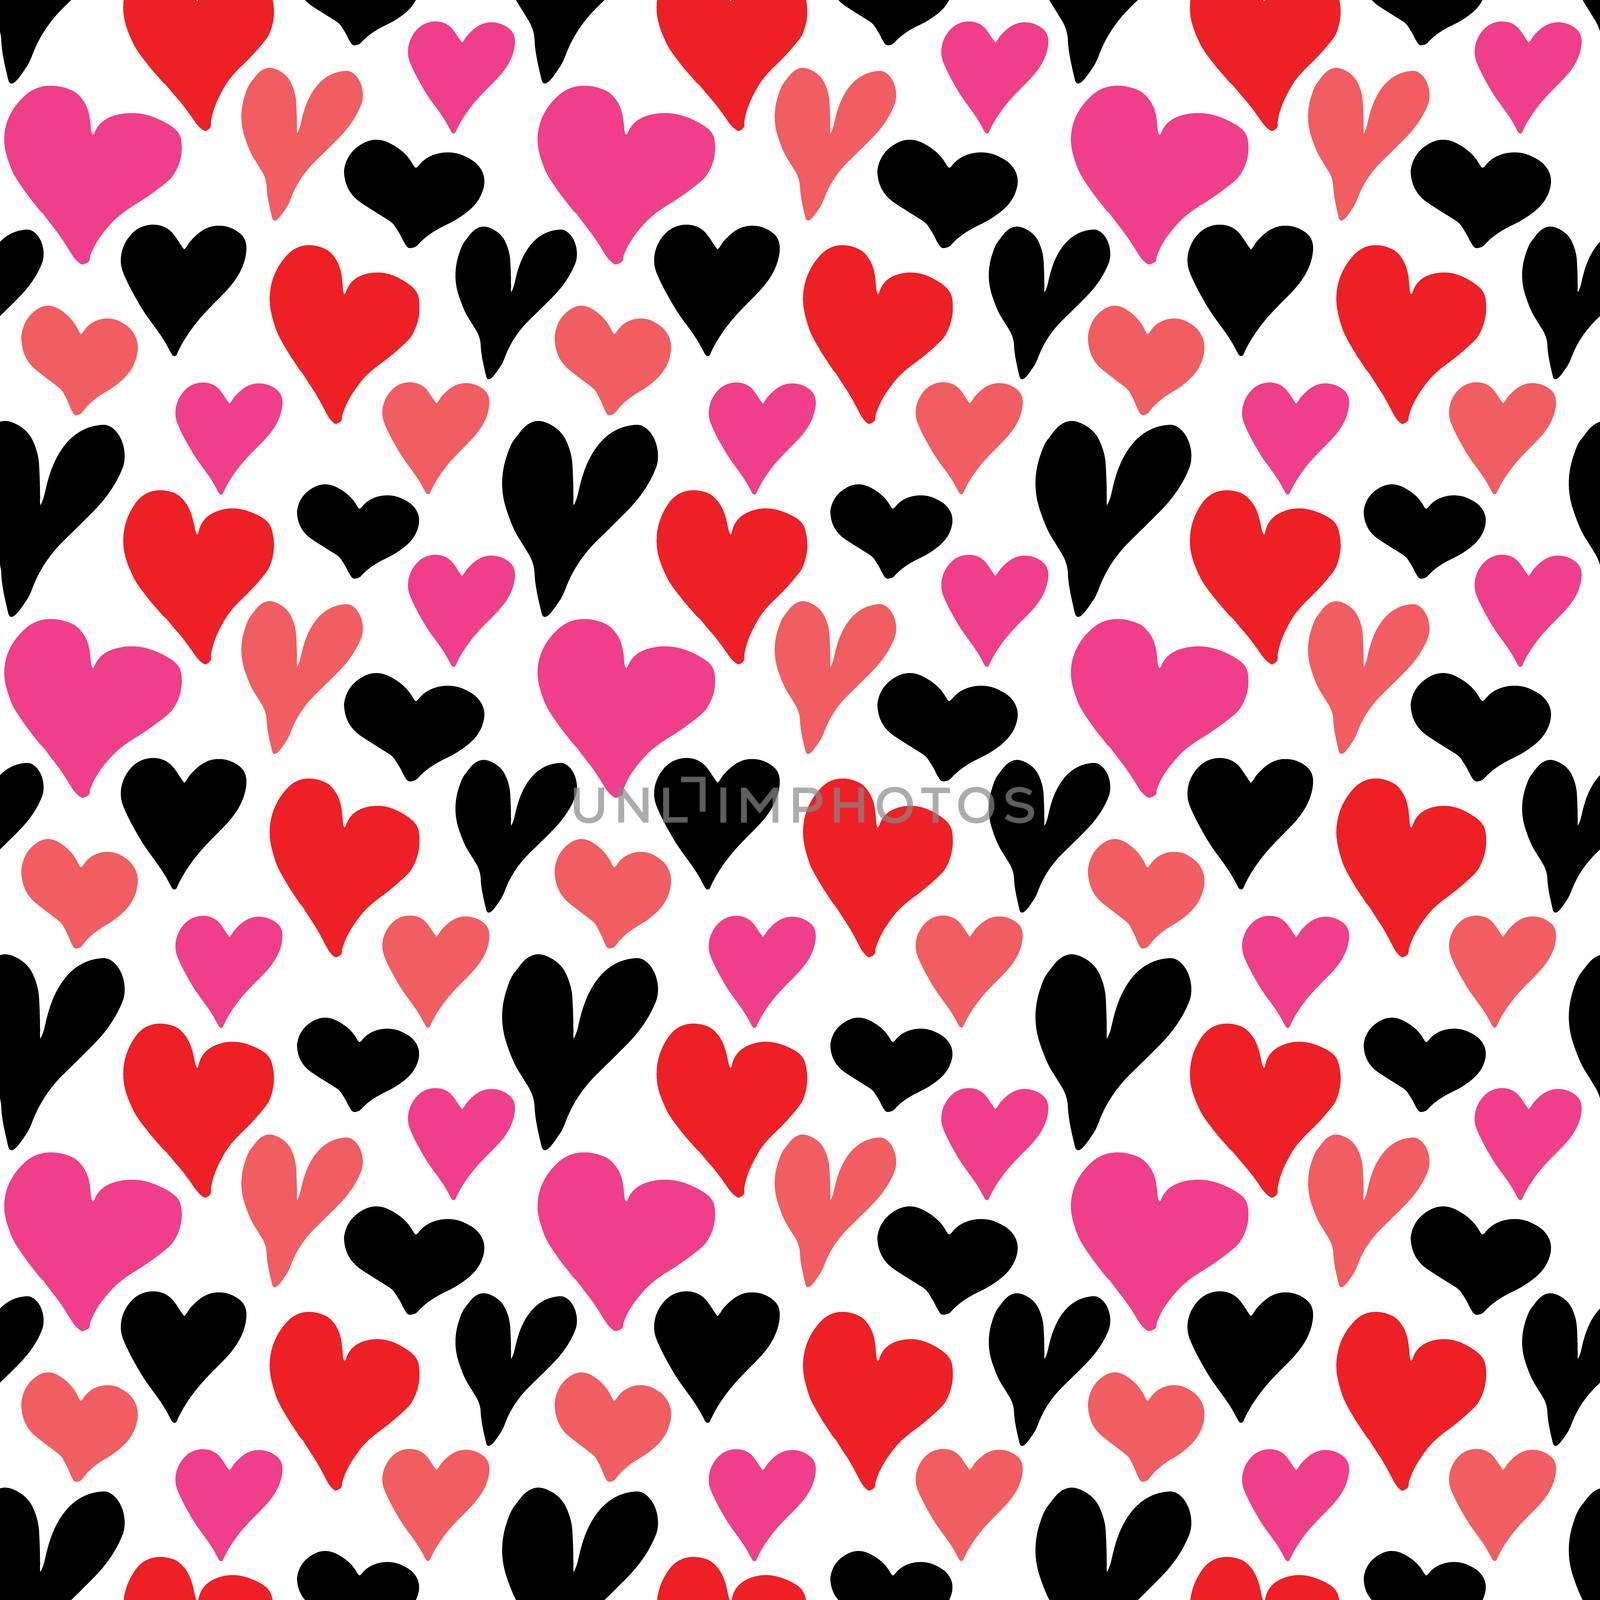 Heart symbol seamless pattern vector illustration. Hand drawn sketch doodle background. Saint Valentains Day or womens day background by Lemon_workshop